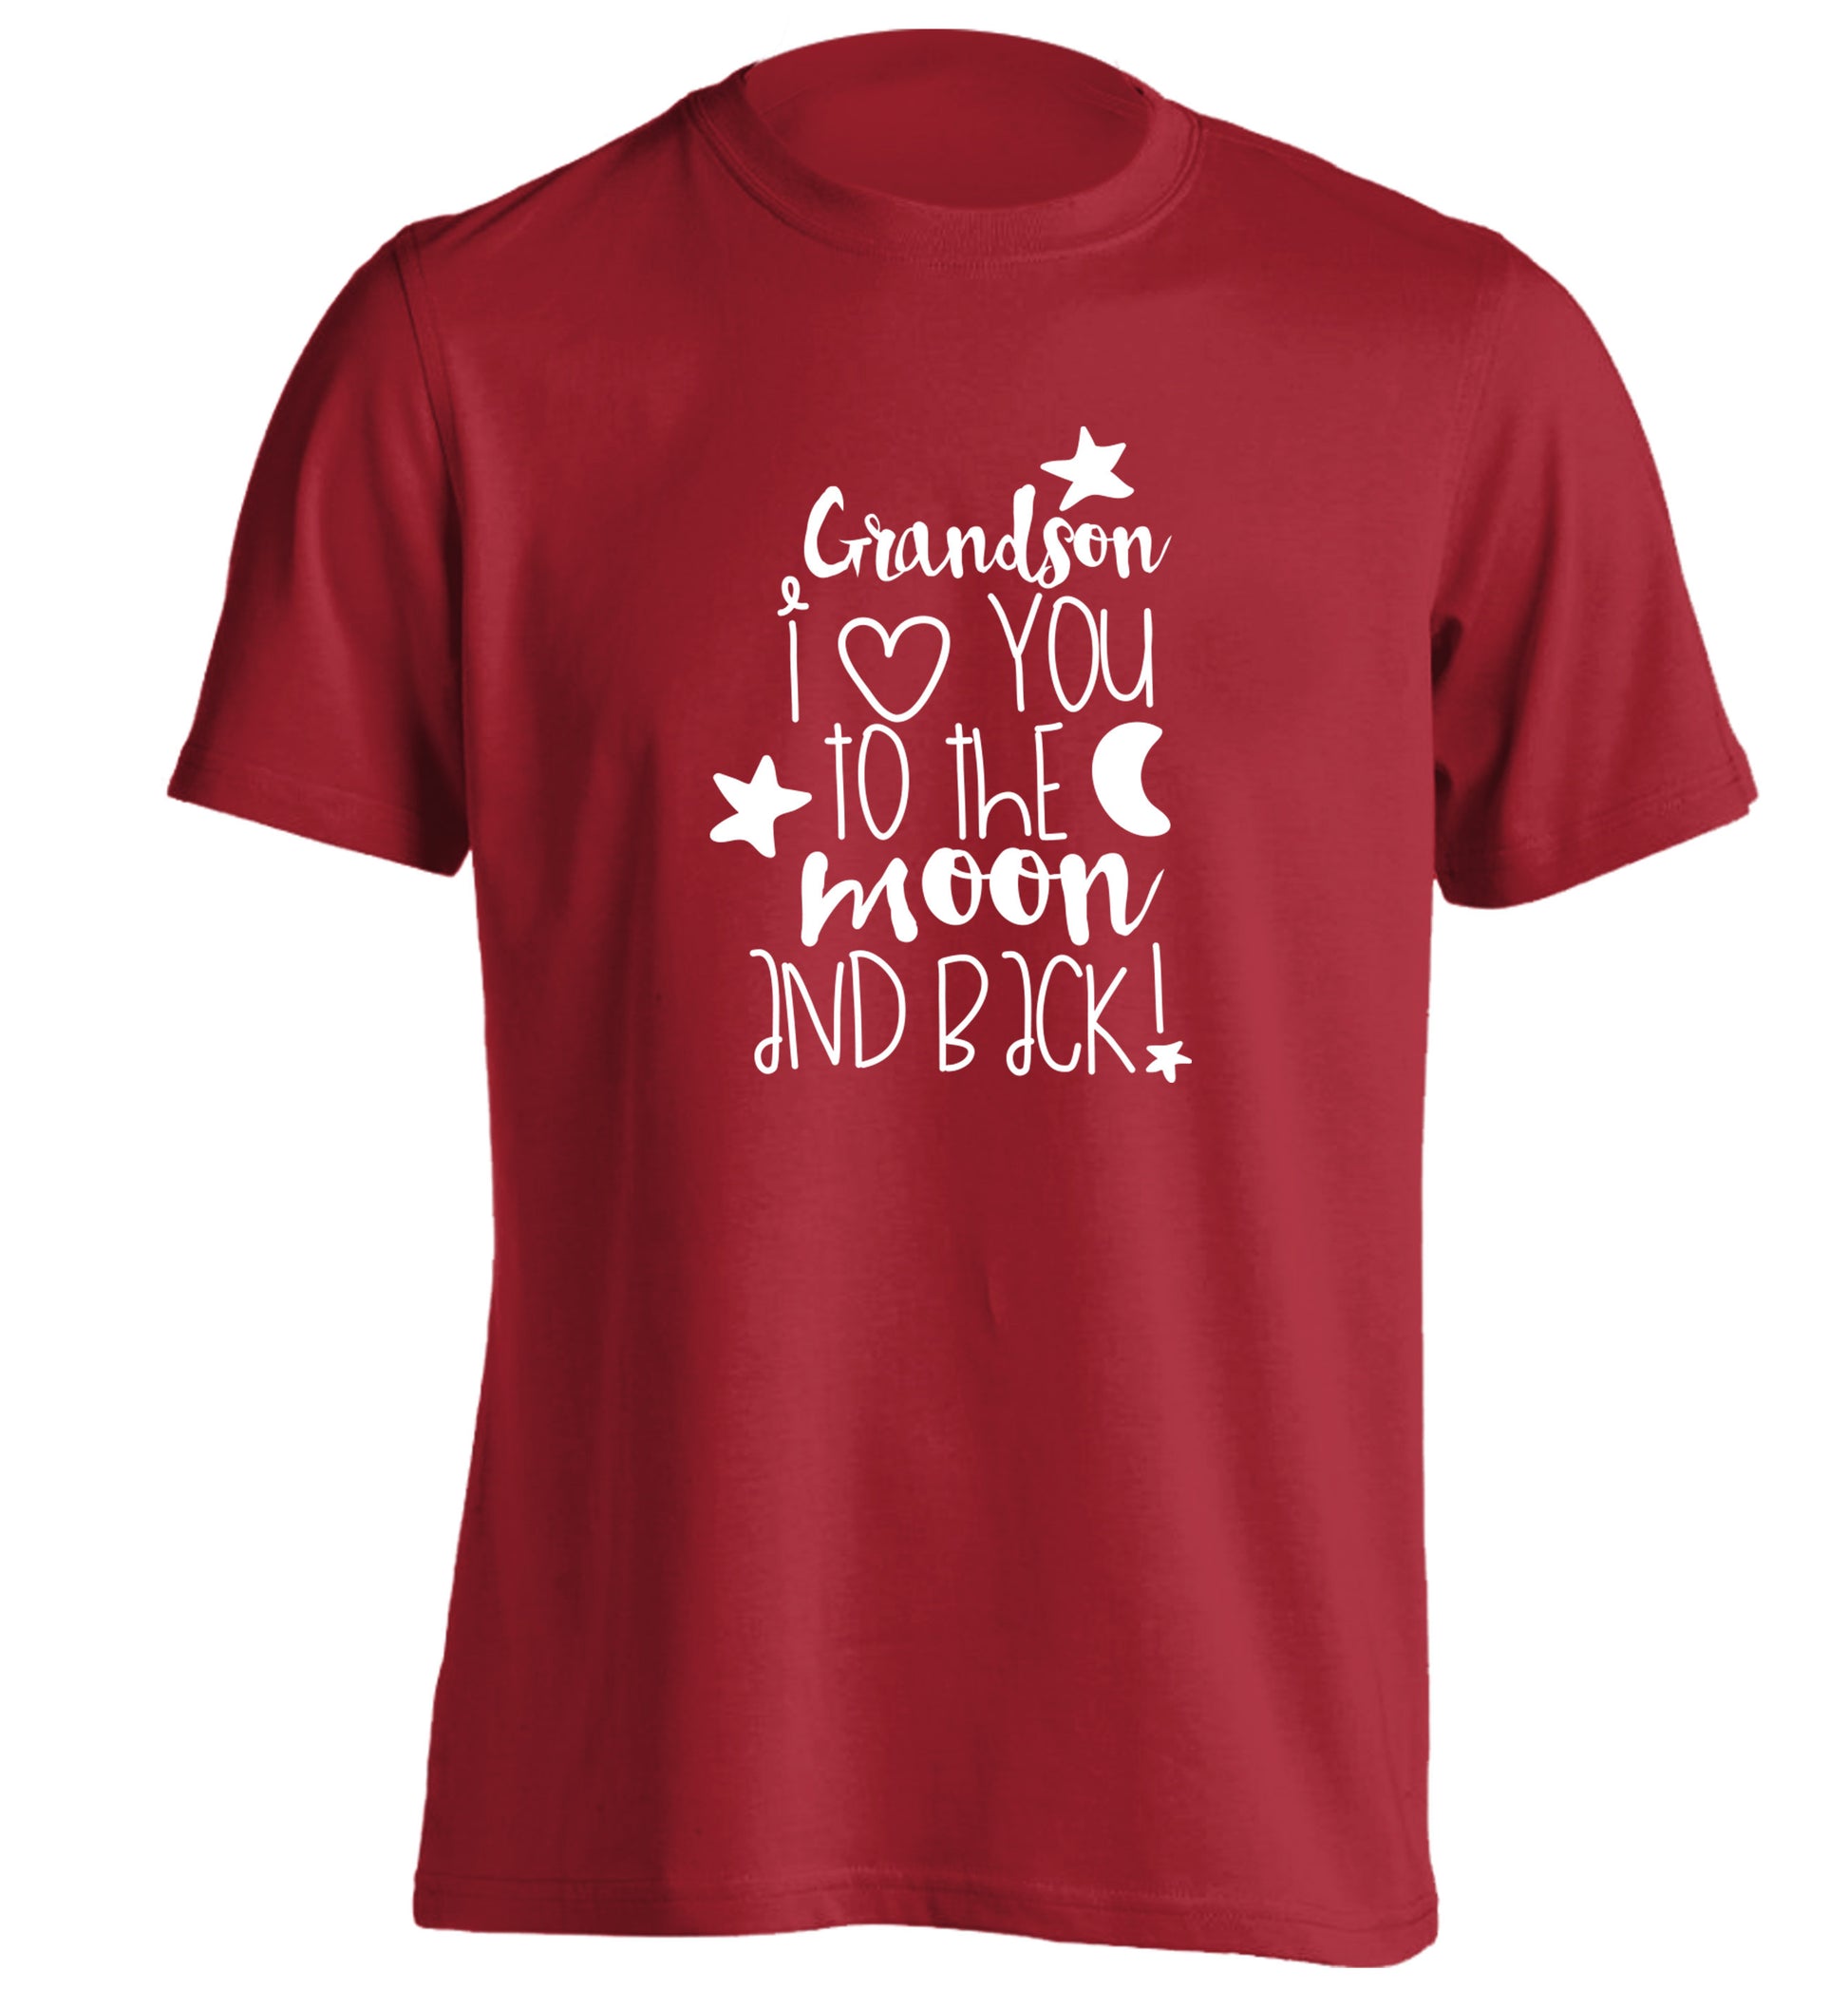 Grandson I love you to the moon and back adults unisex red Tshirt 2XL